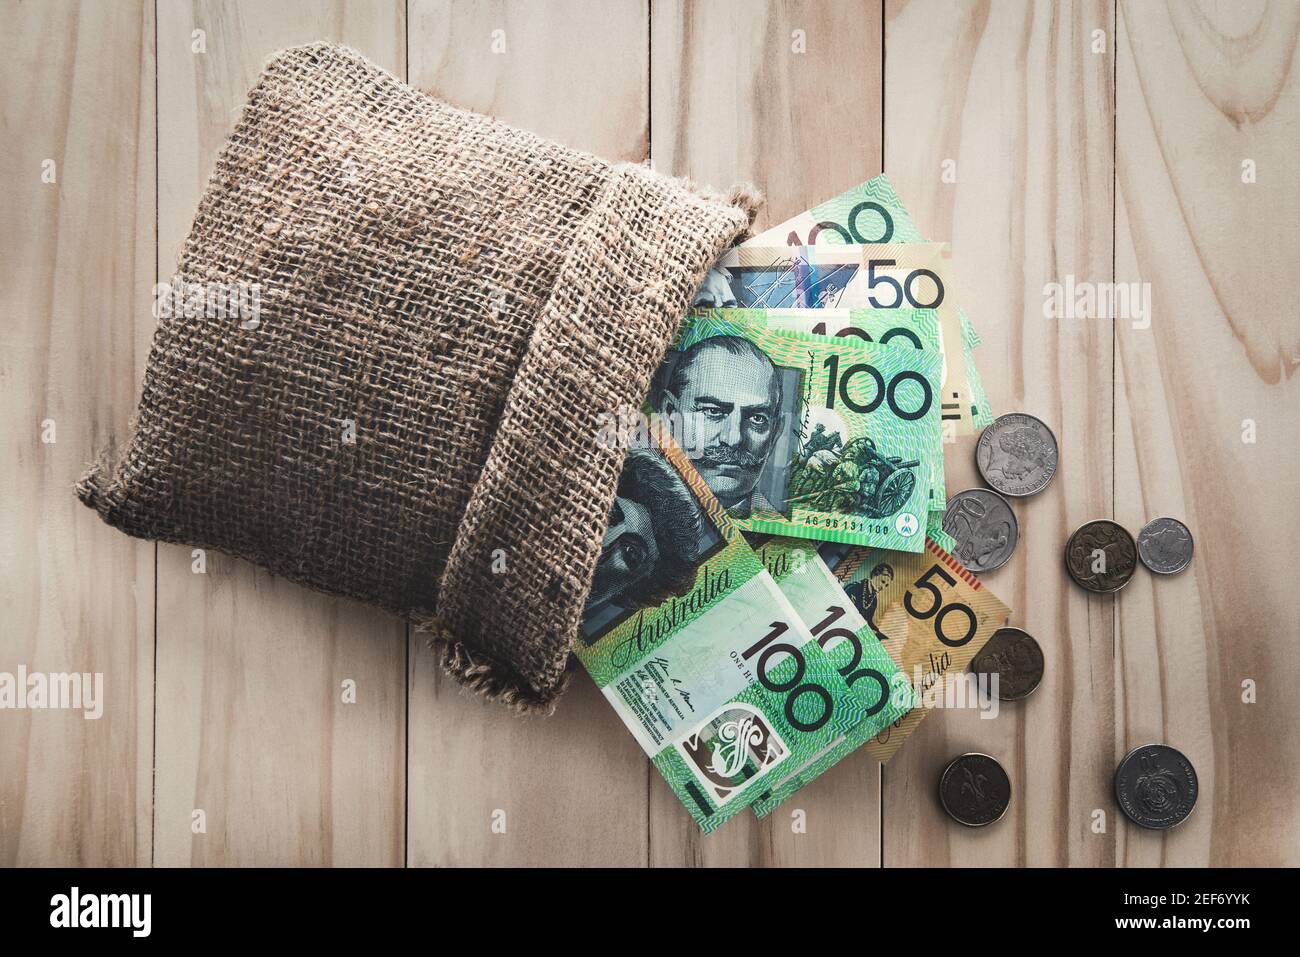 Money, Australian dollars (AUD), spilled out from a bag Stock Photo